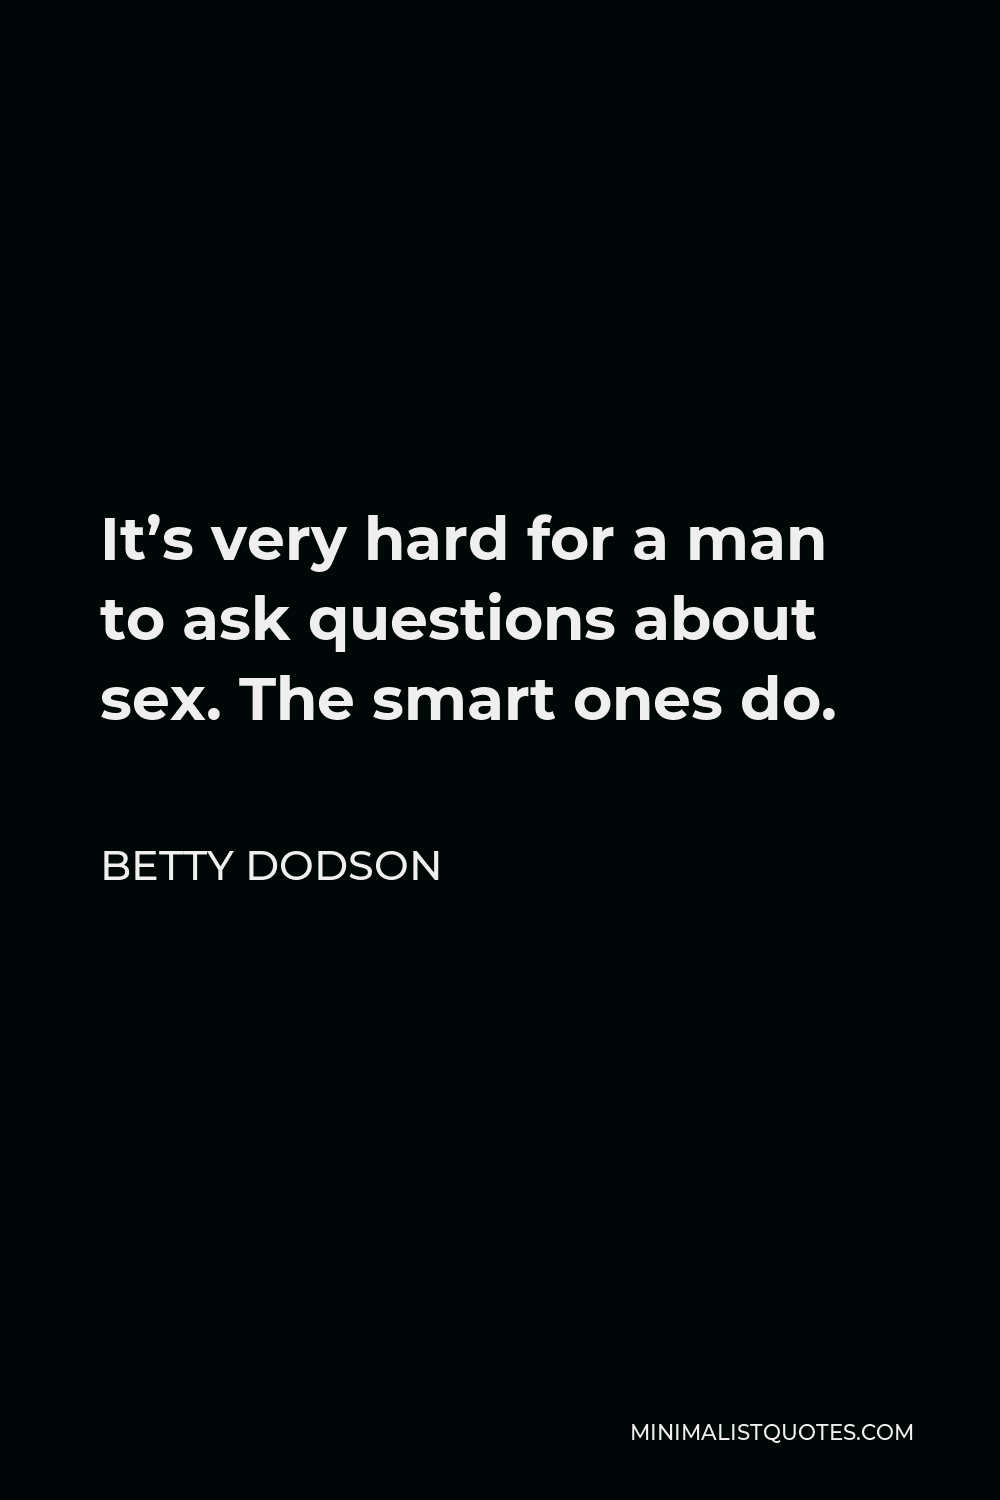 Betty Dodson Quote It S Very Hard For A Man To Ask Questions About Sex The Smart Ones Do